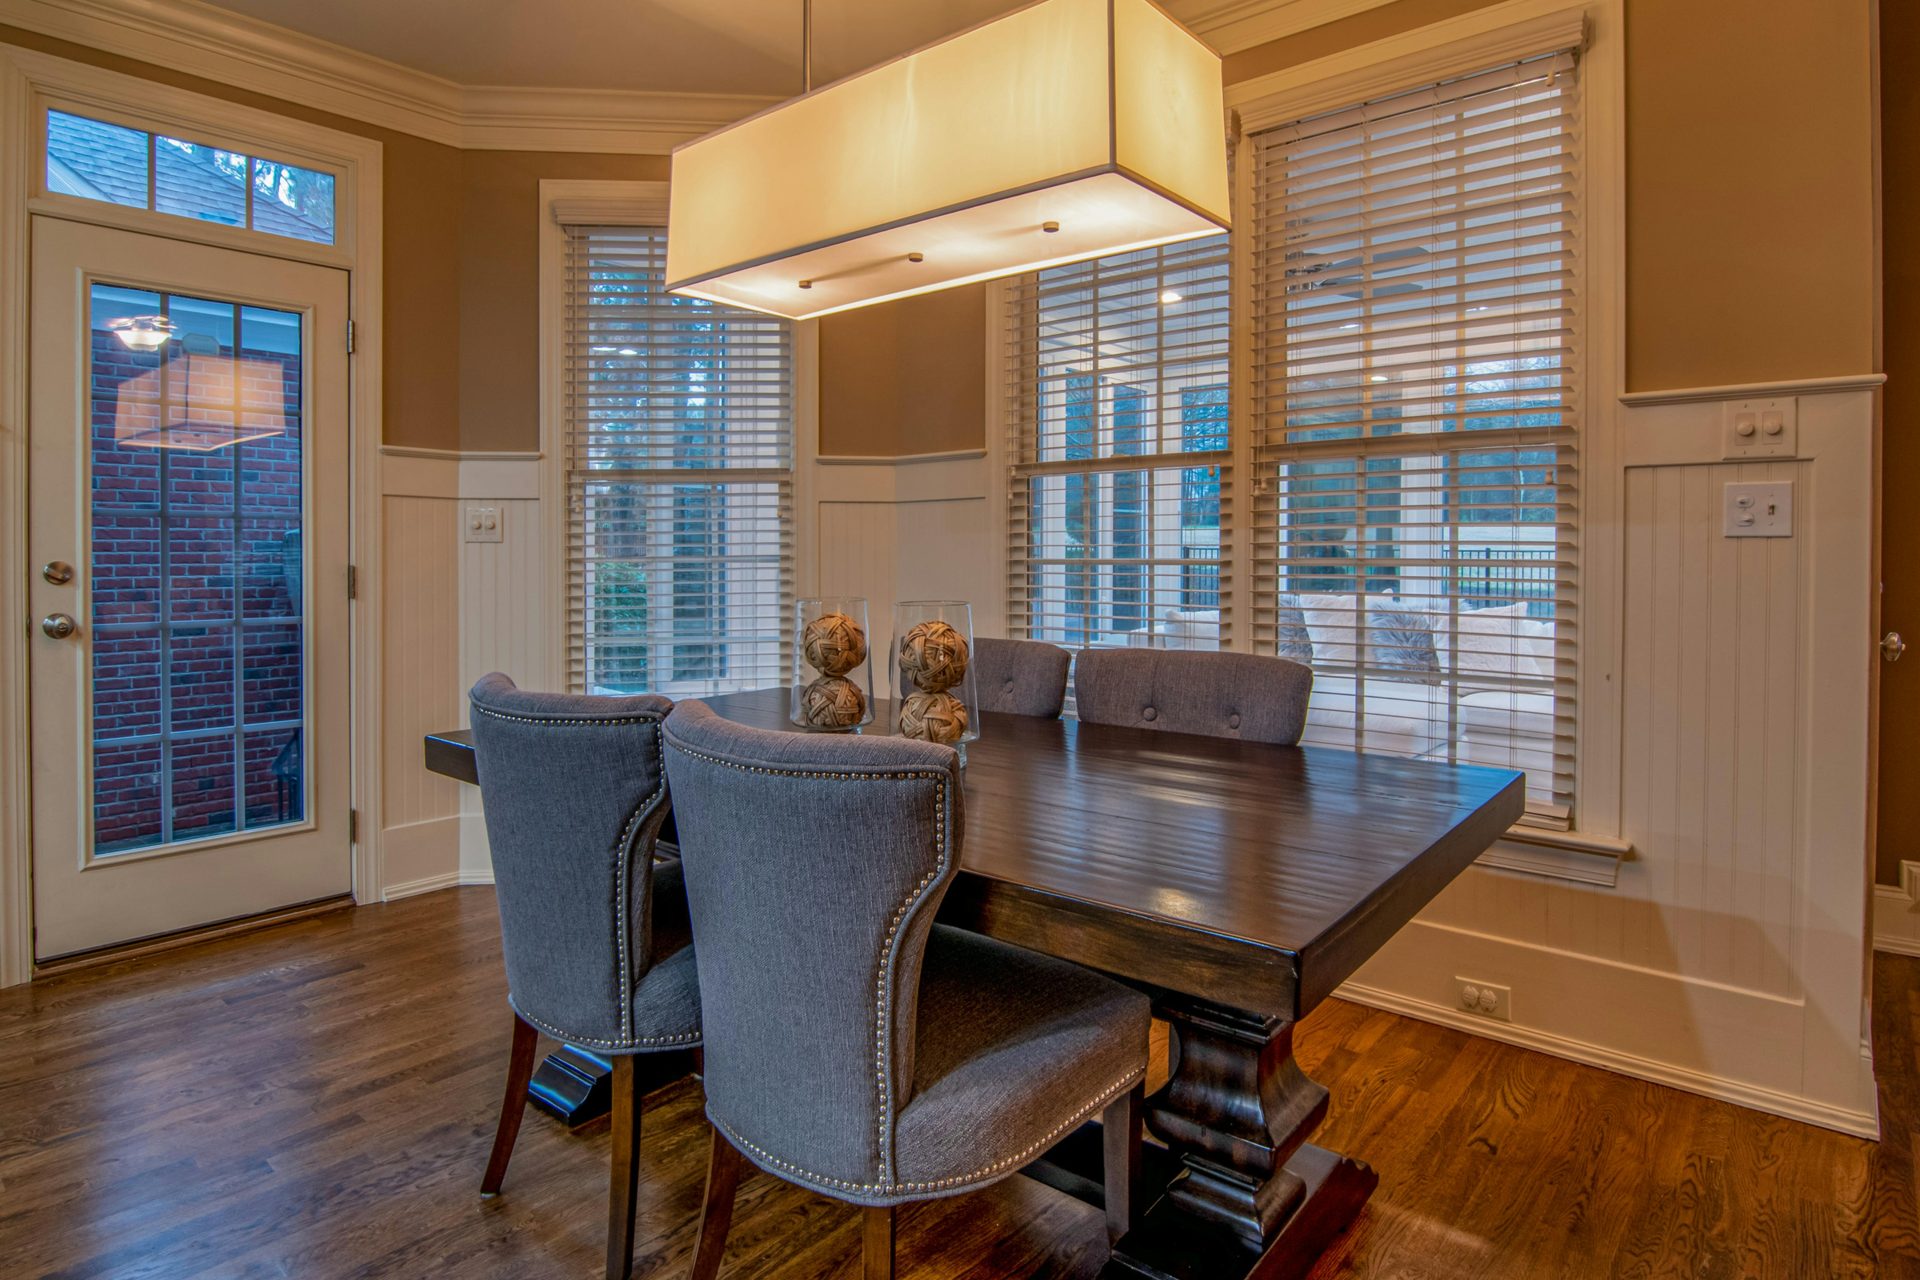 Dining Room Table Styles: Top Picks for Your Home